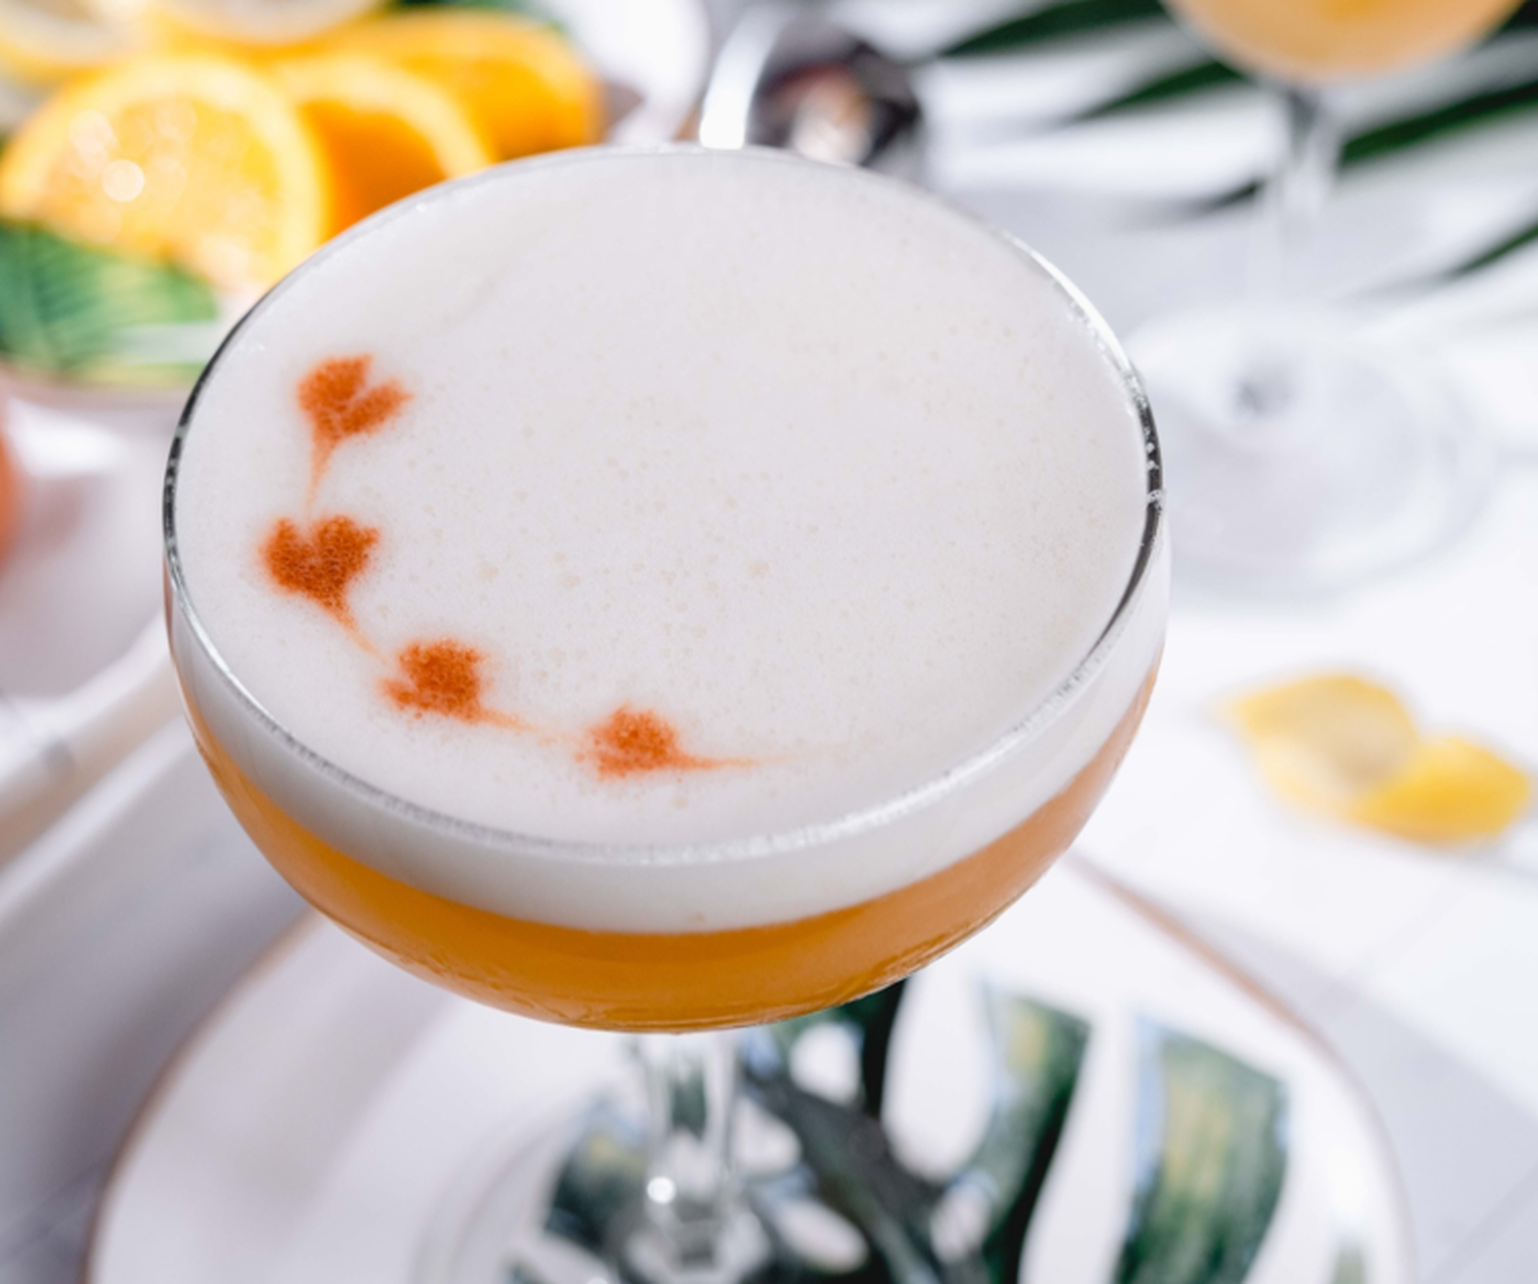 Close up image of a whiskey sour with egg white foam and a heart design made with bitters